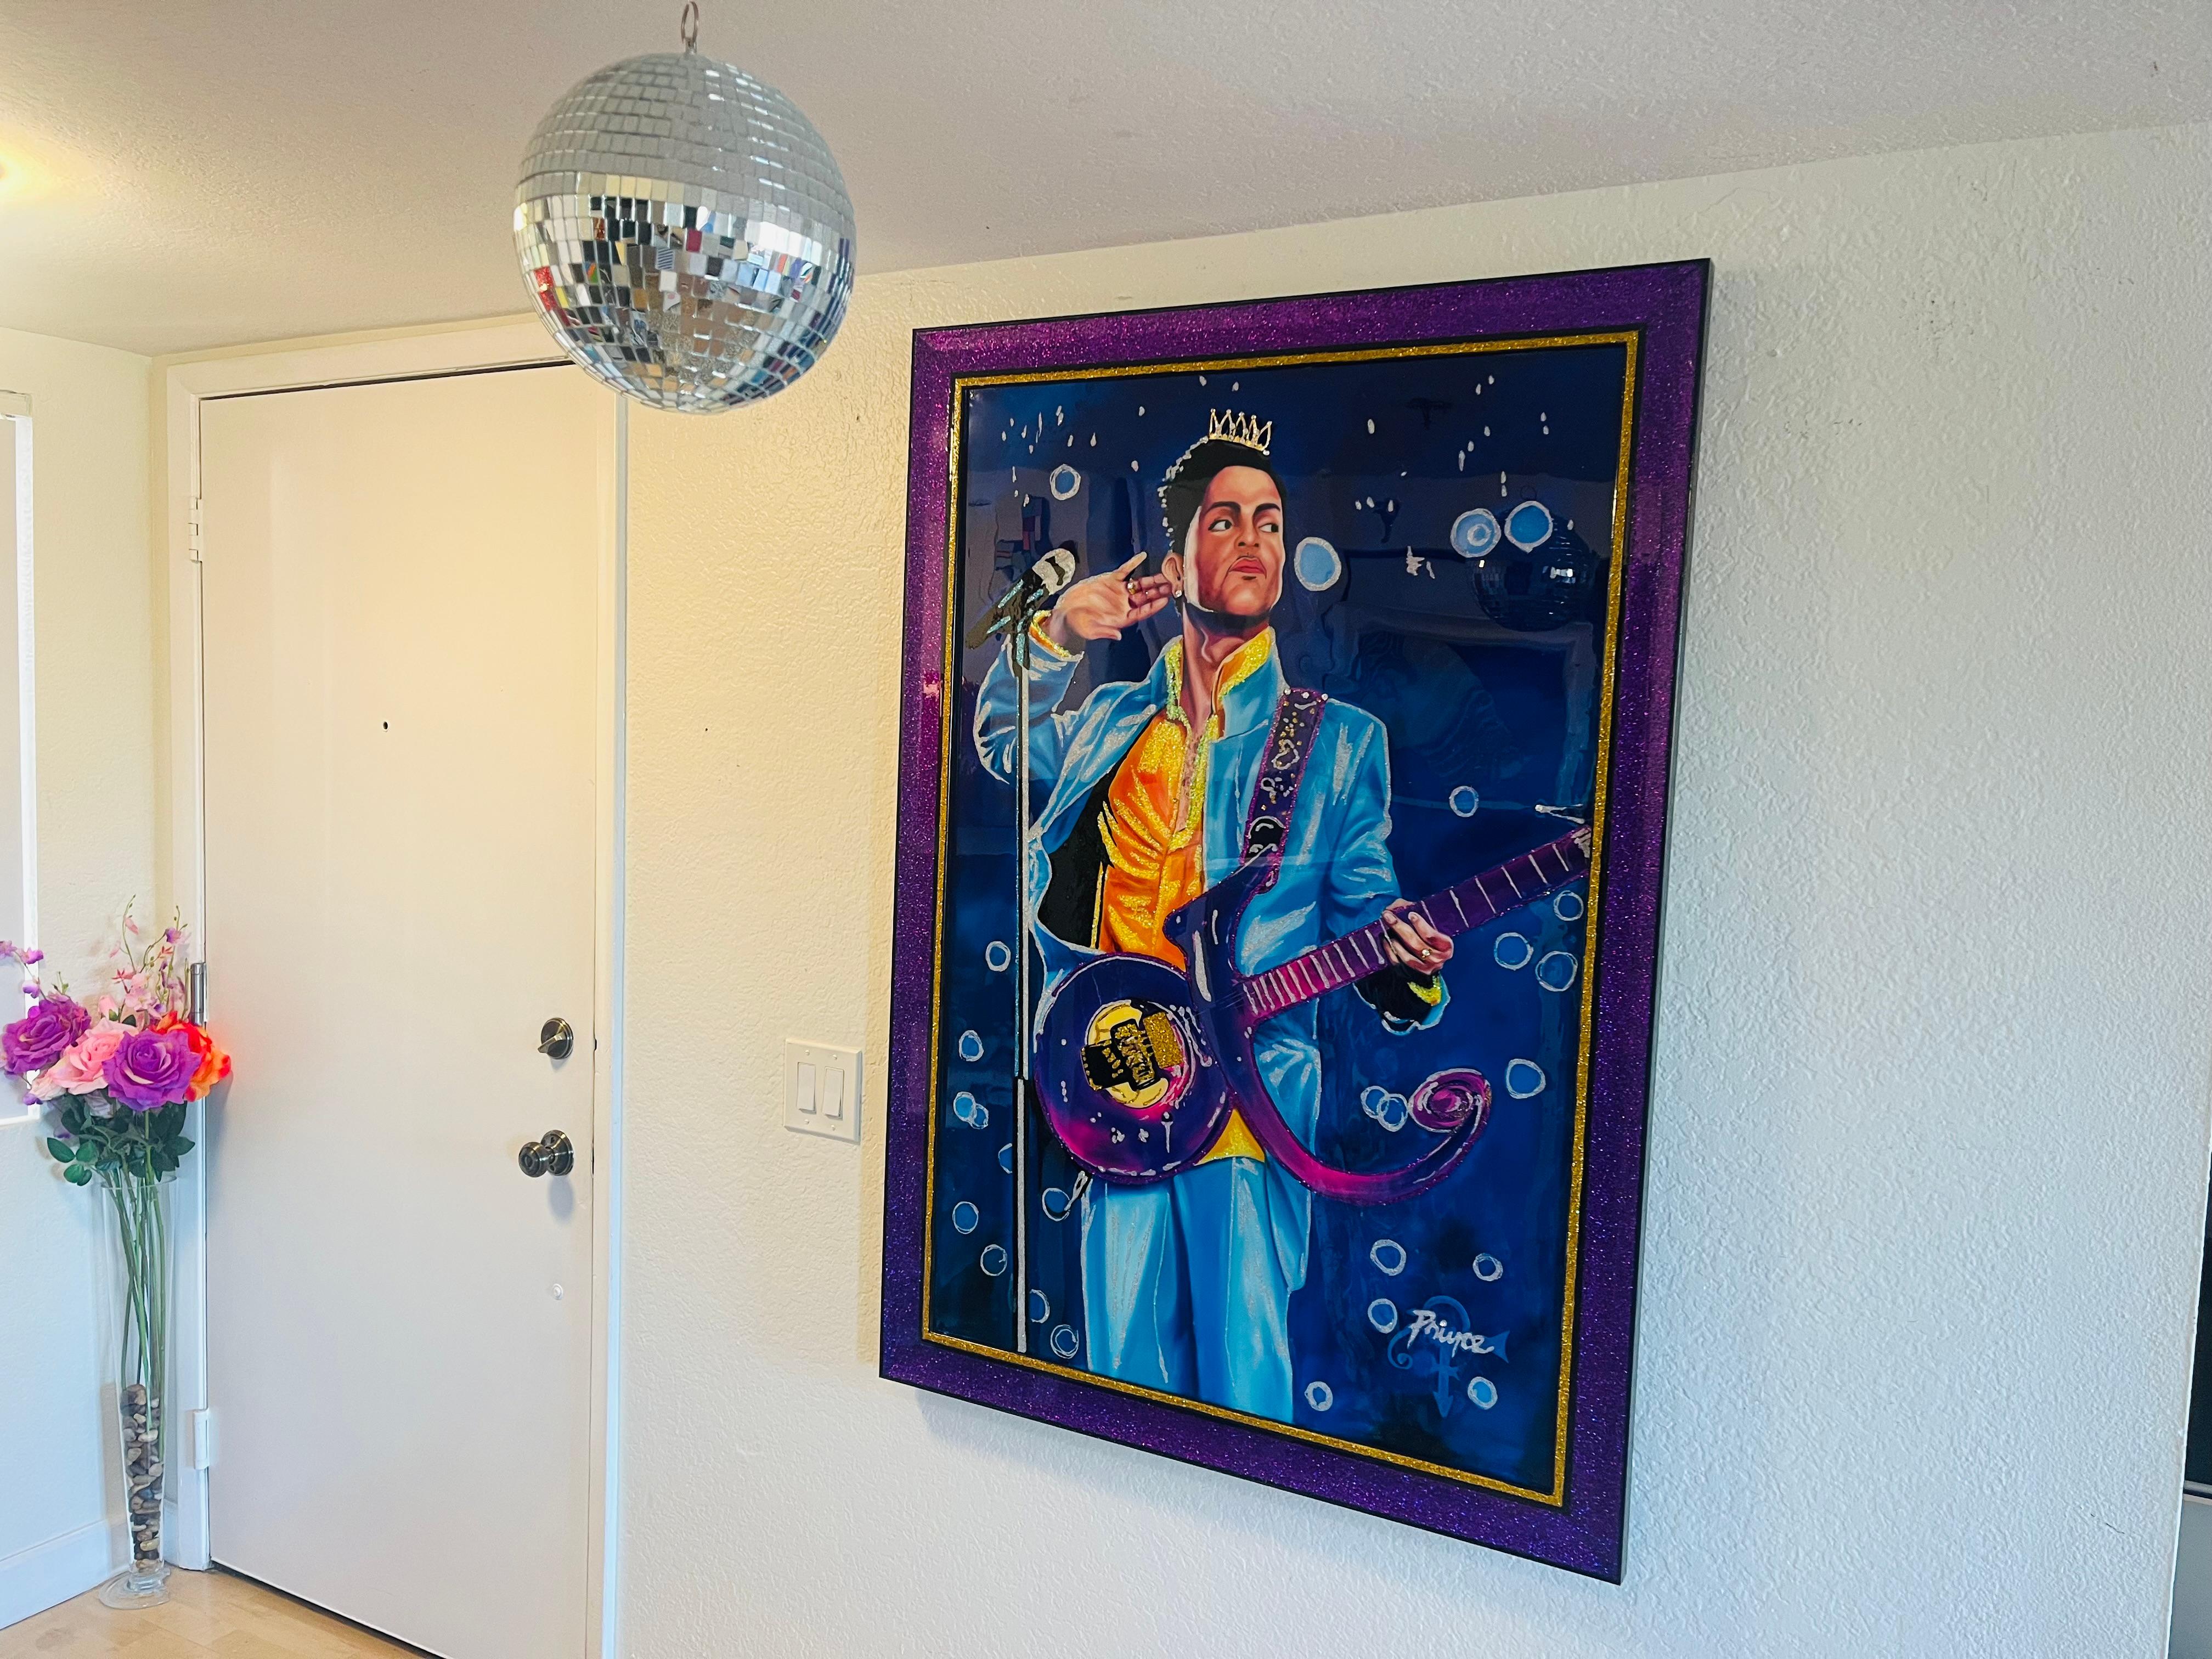                **ANNUAL SUPER SALE UNTIL MAY 15TH ONLY**
*This Price Won't Be Repeated Again This Year-Take Advantage Of It*

KING PRINCE OF POP is one of the biggest painting homage to the one and only Prince.

The artist placed an improvised